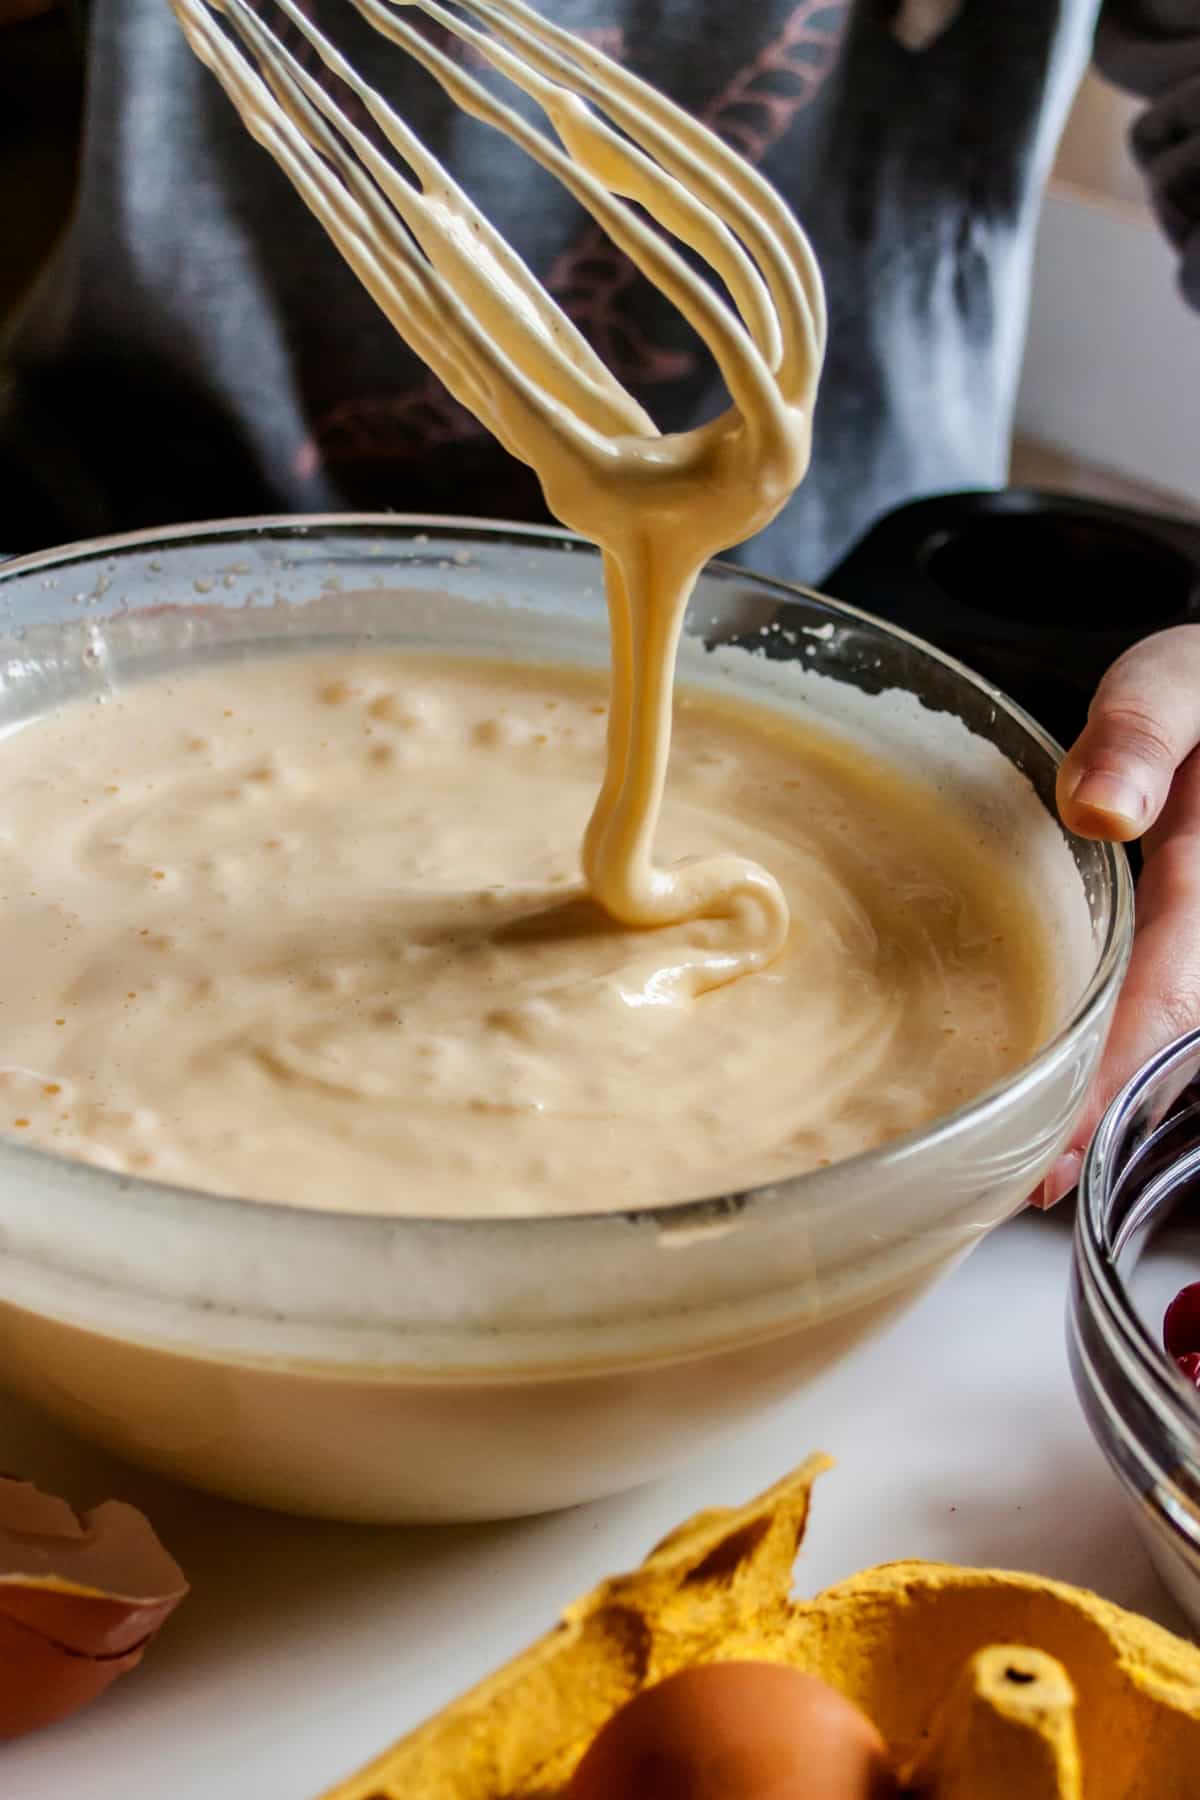 dripping cupcake batter from the whisk over a transparent bowl of cake batter.